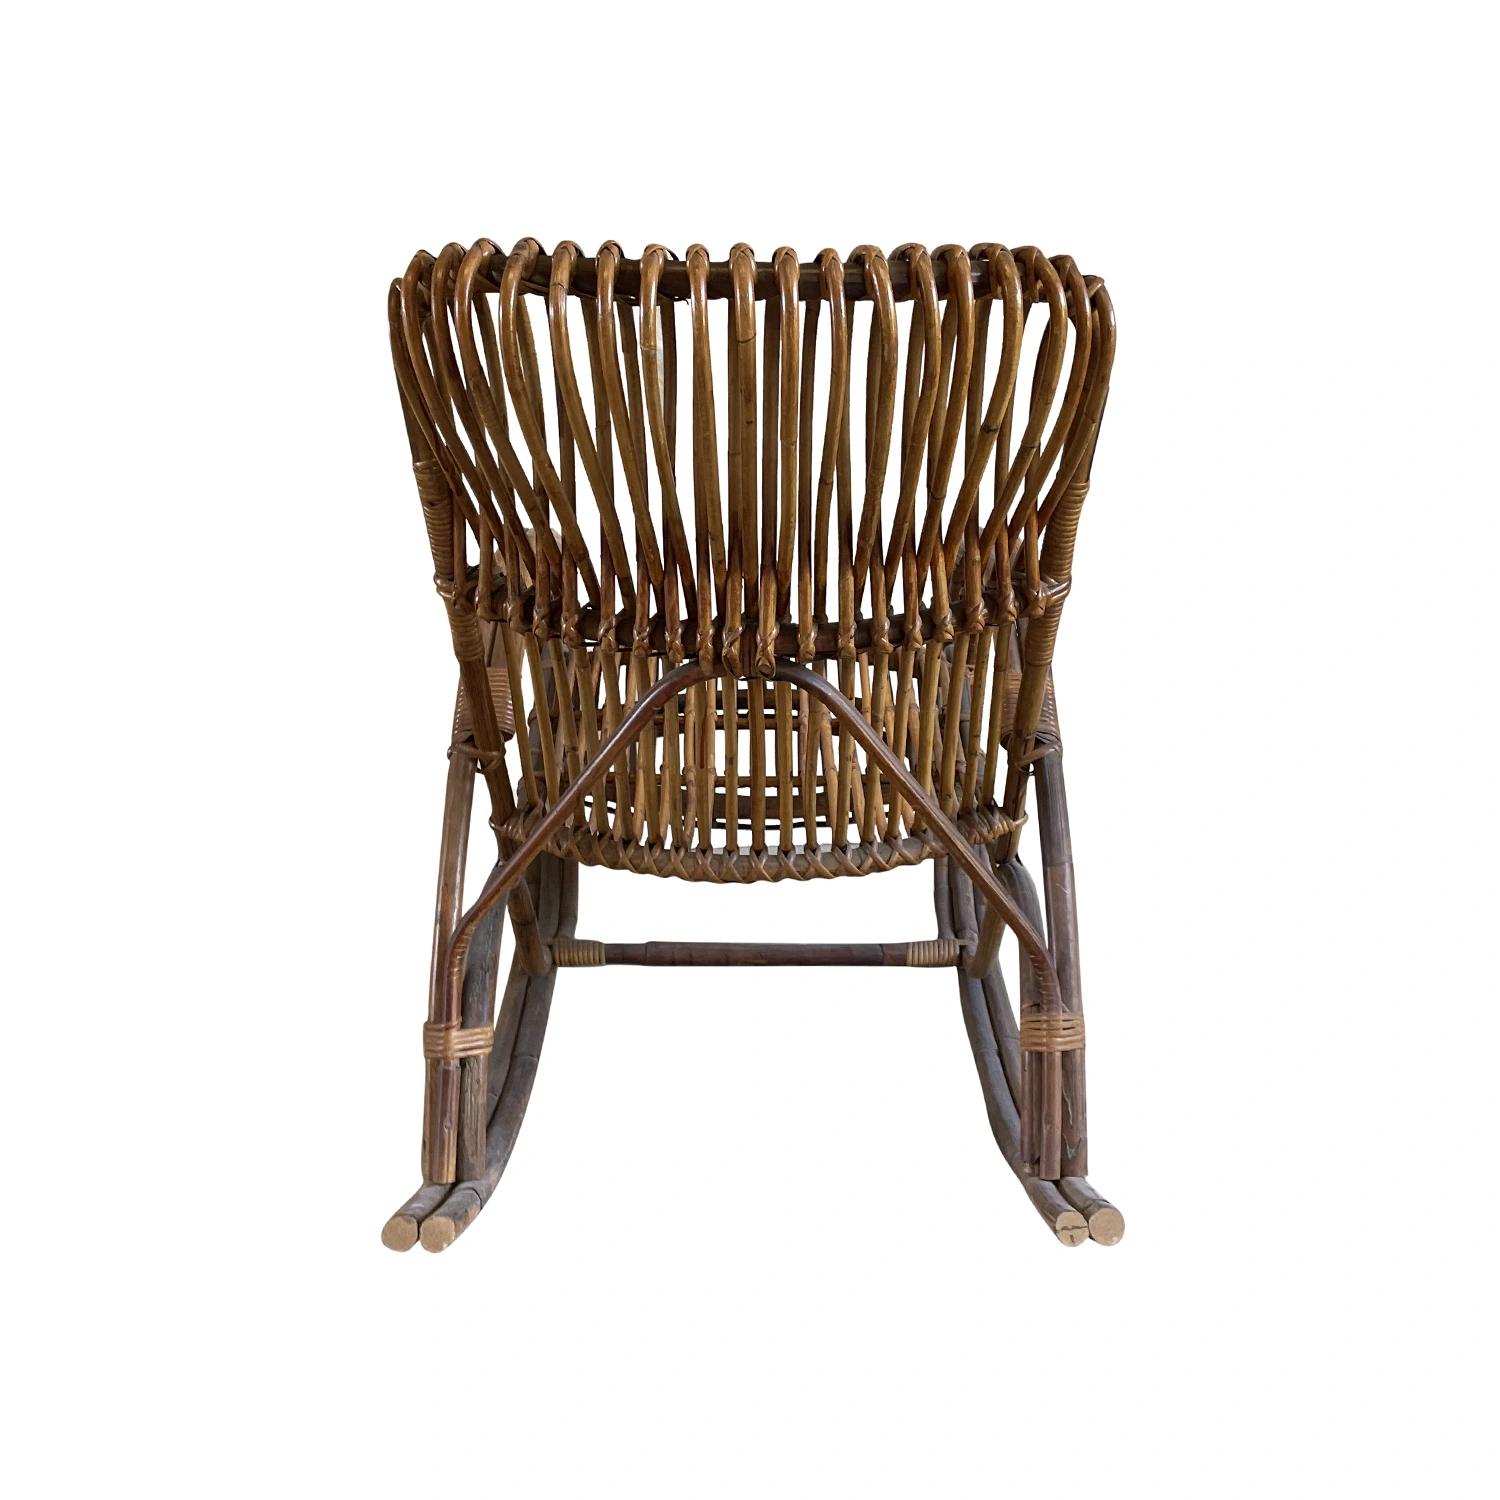 Hand-Crafted 20th Century Italian Mid Century Rattan Rocking Chair - Vintage Lounge Chair For Sale